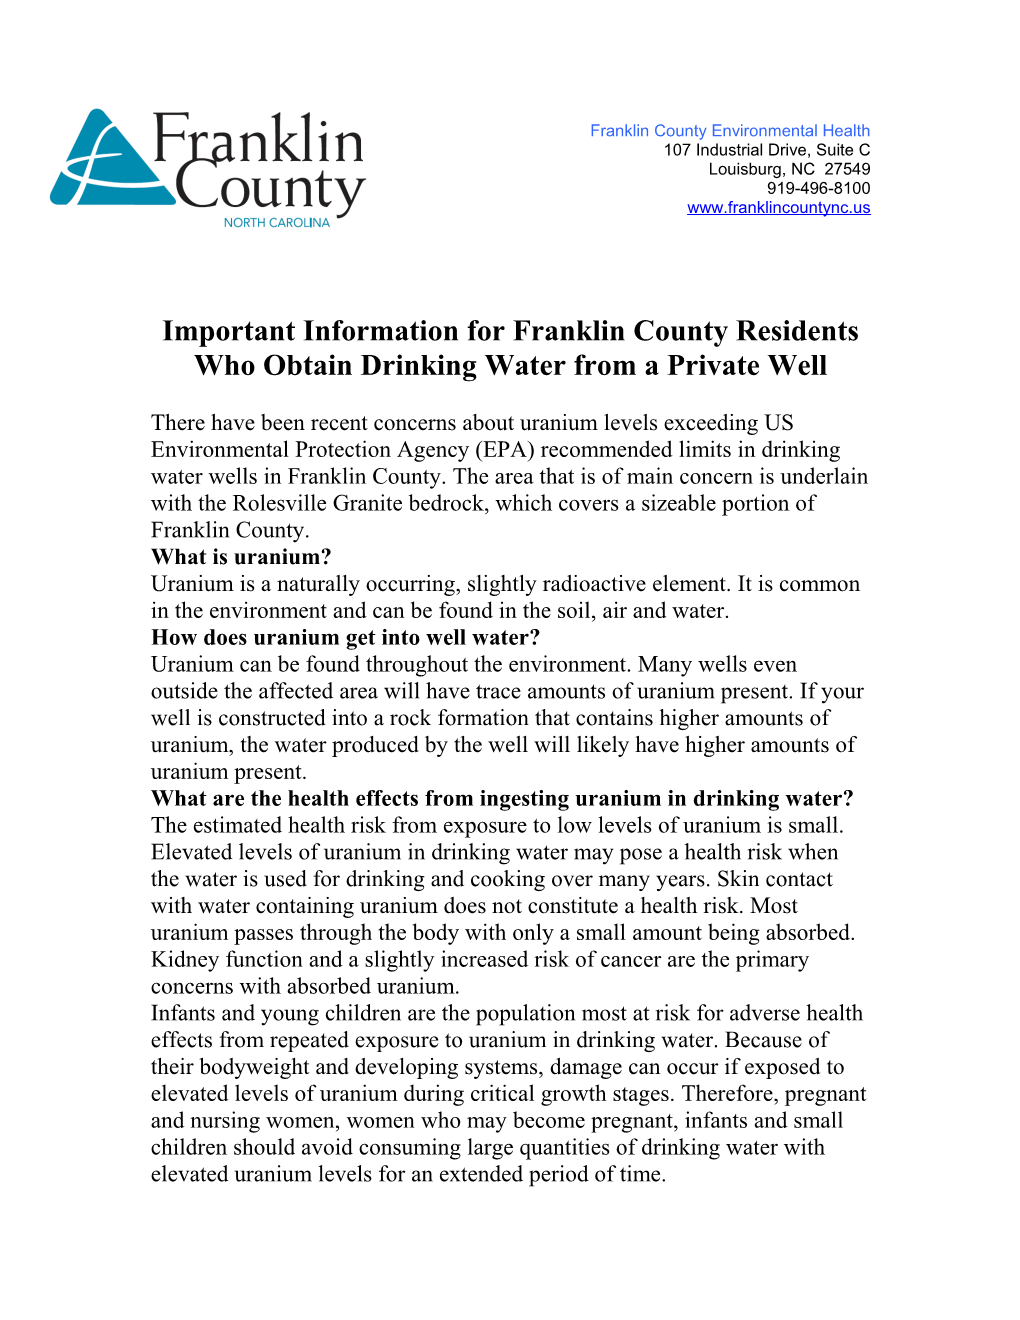 Important Information for Franklin County Residents Who Obtain Drinking Water from a Private